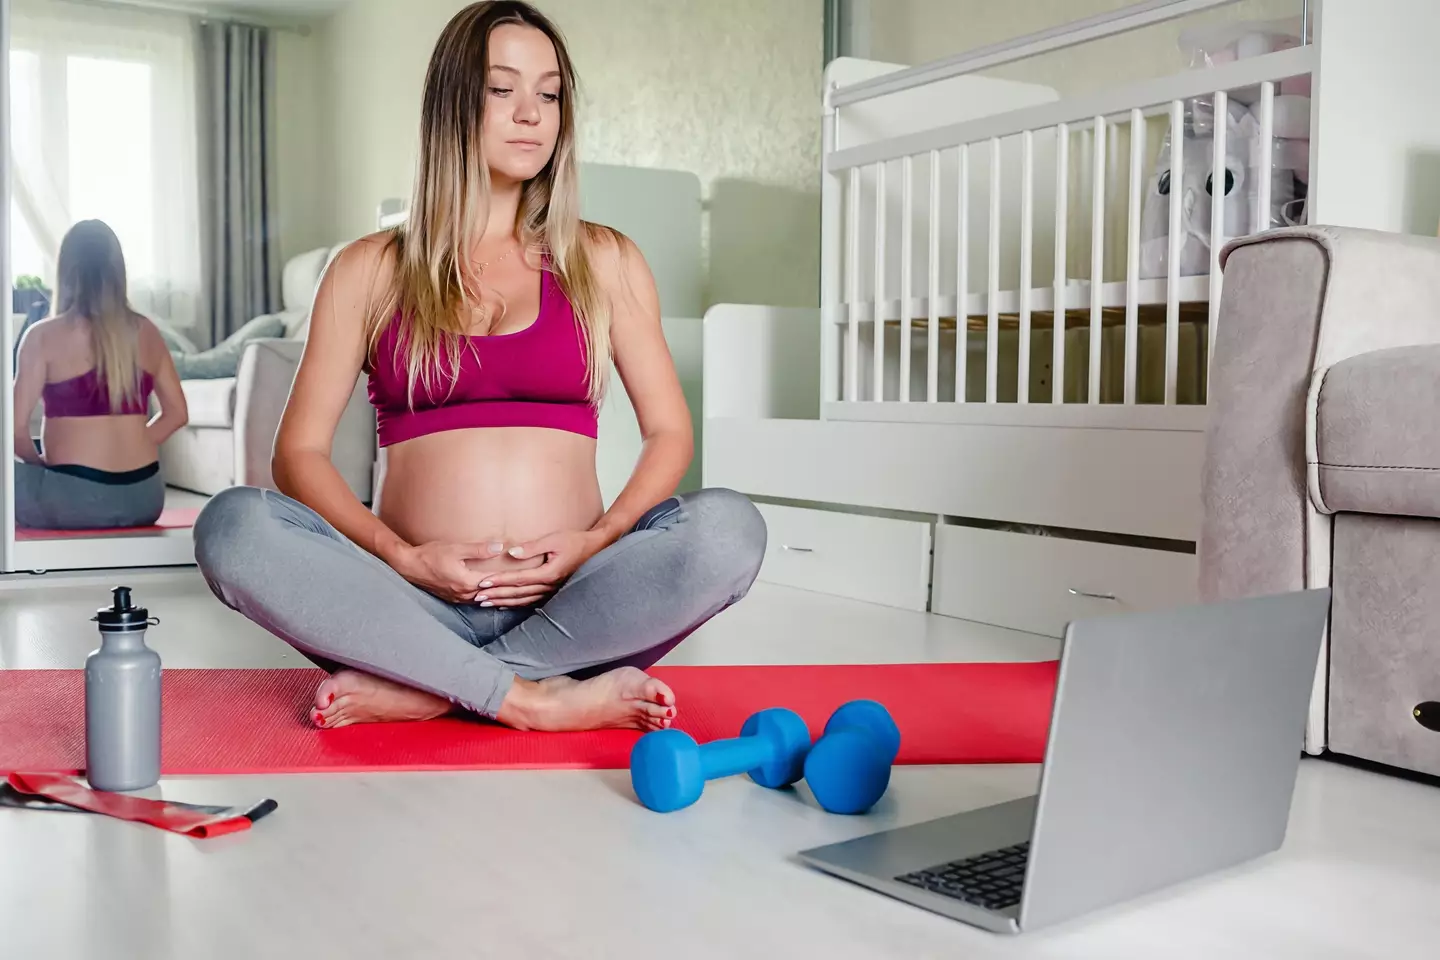 It's always recommended to seek professional advice for exercising during pregnancy (